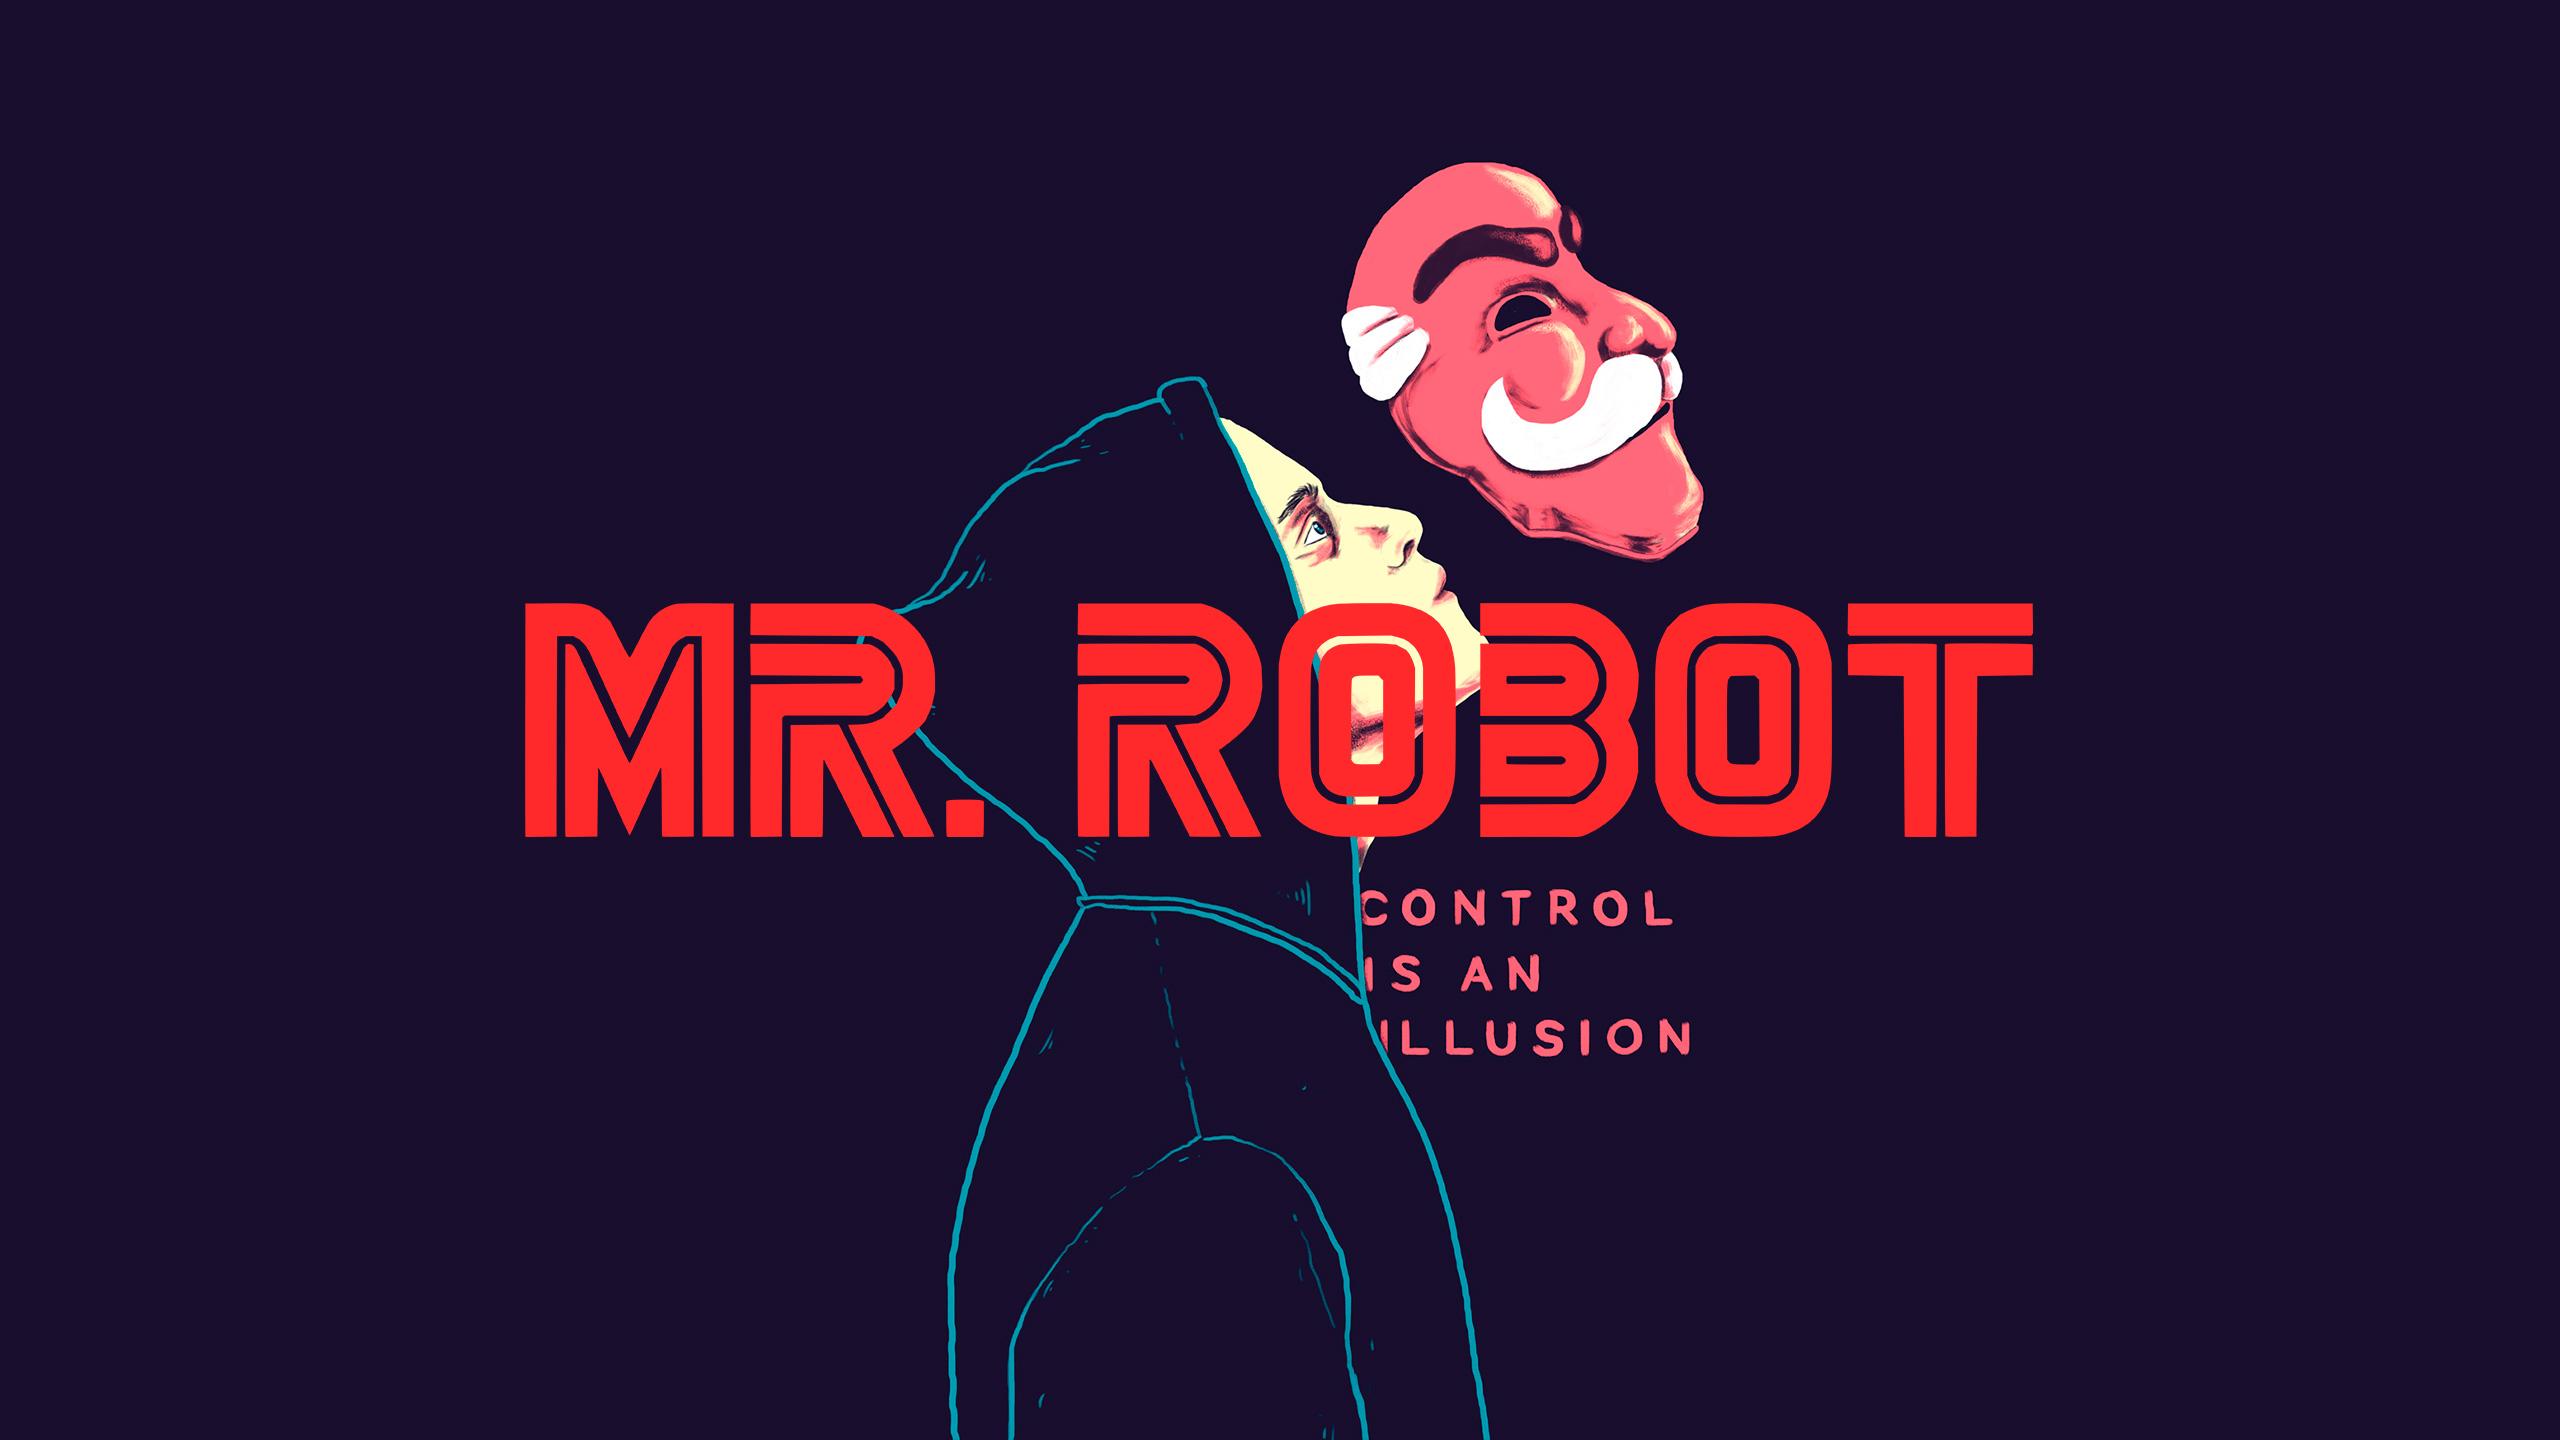 Mr. Robot Wallpaper Control Is An Illusion